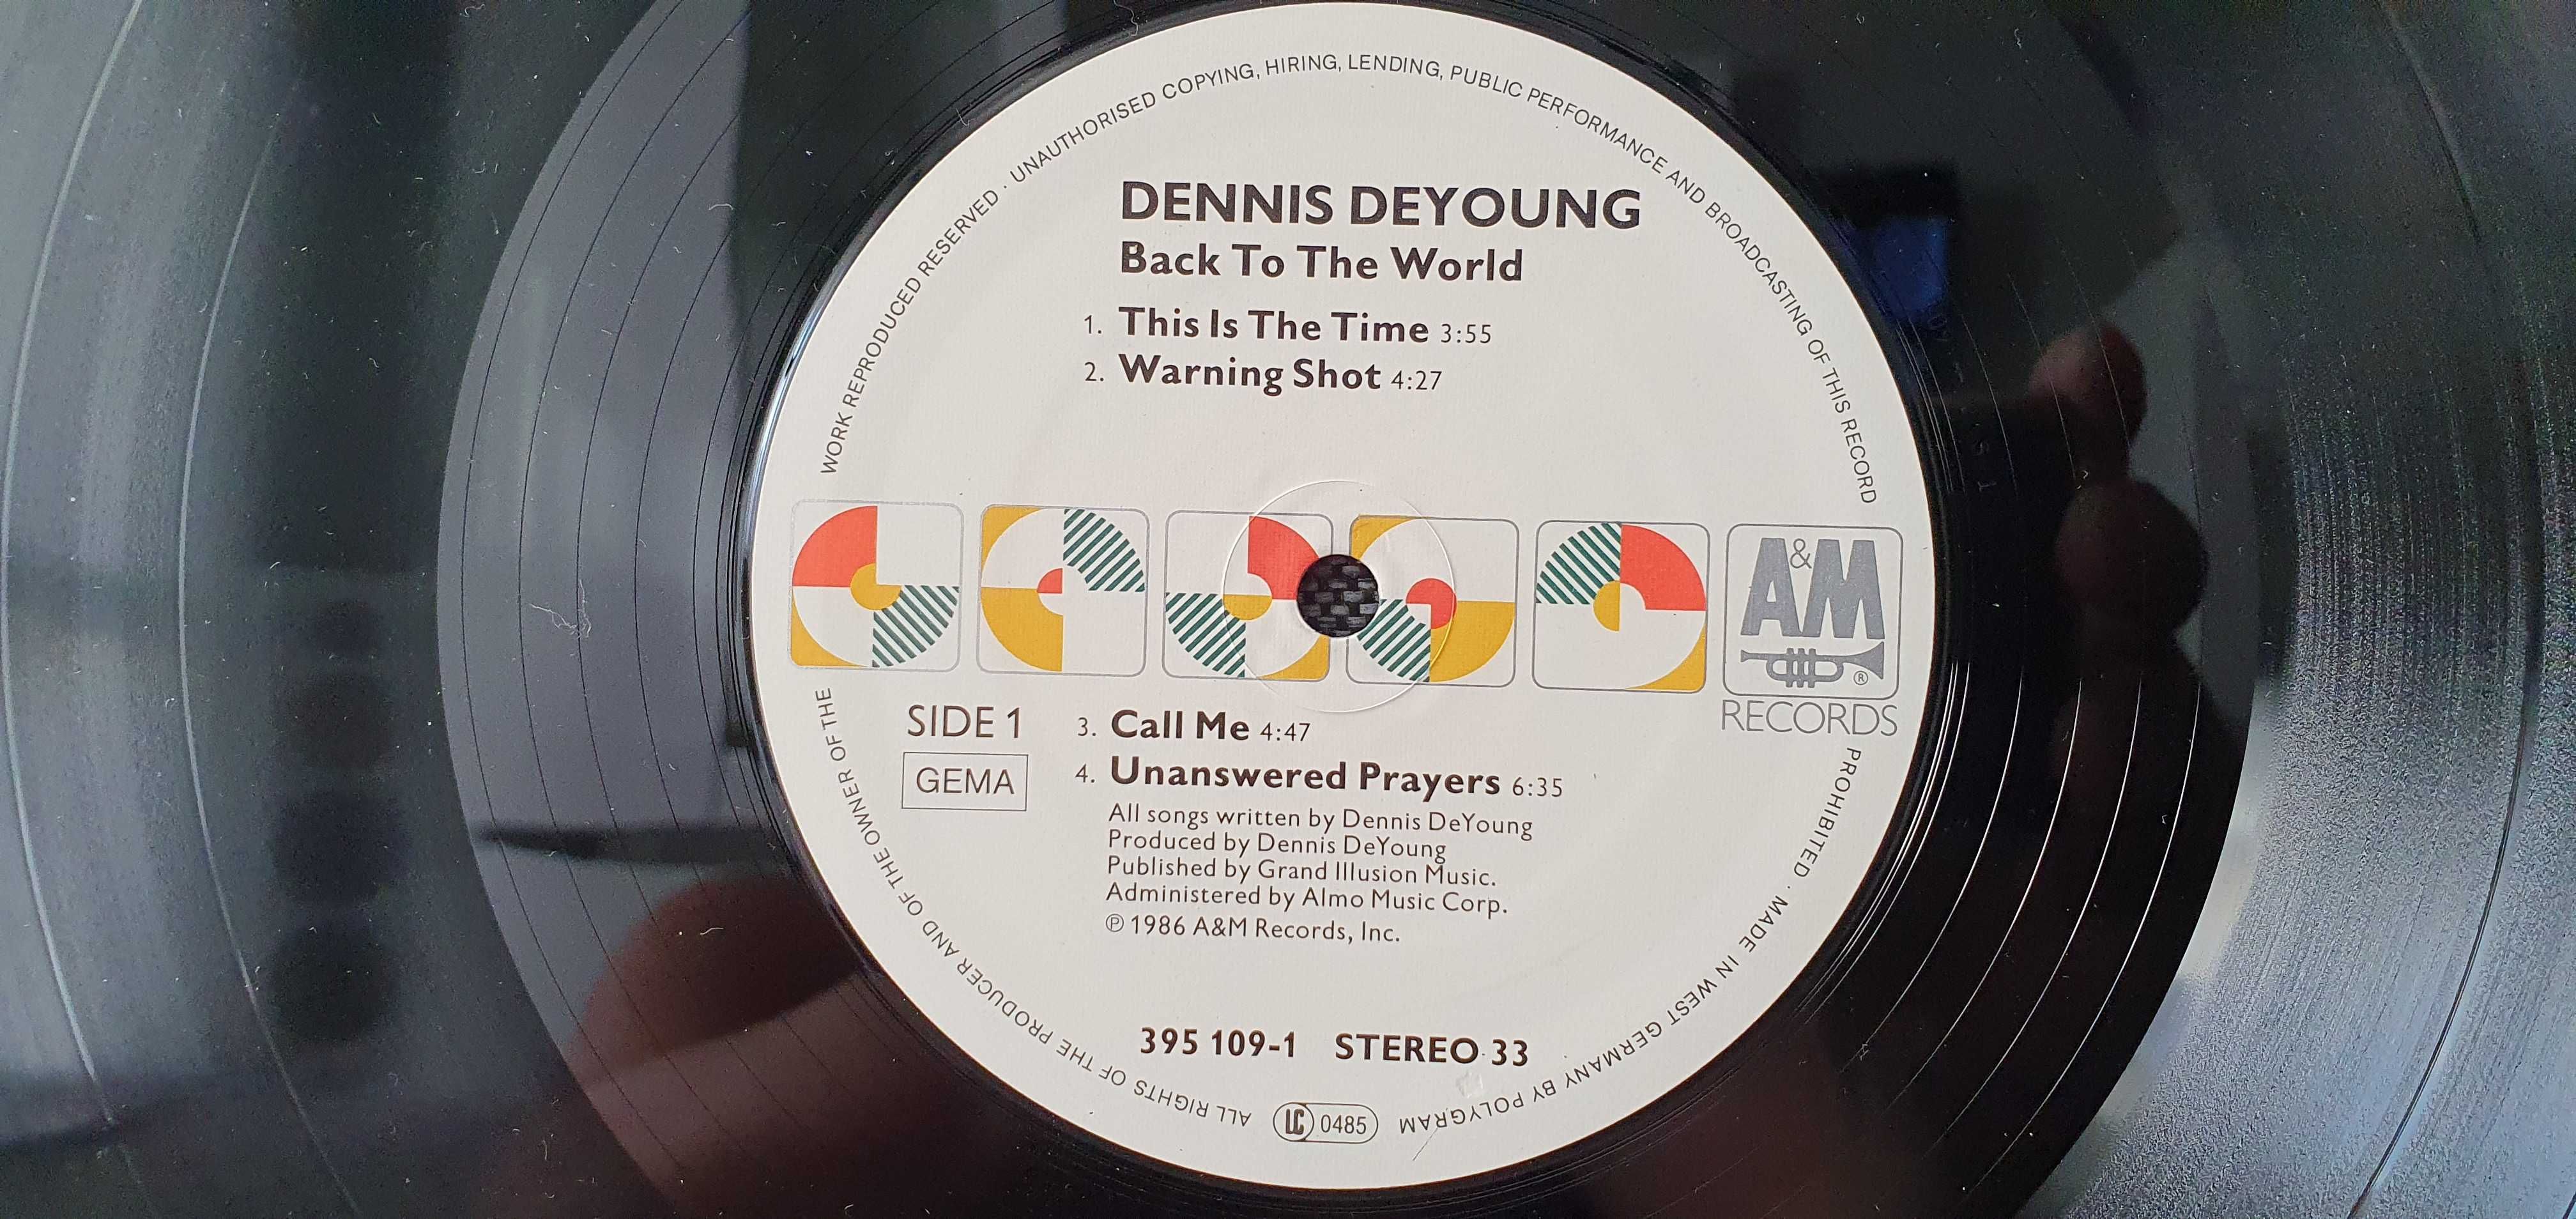 Dennis DeYoung – Back To The World